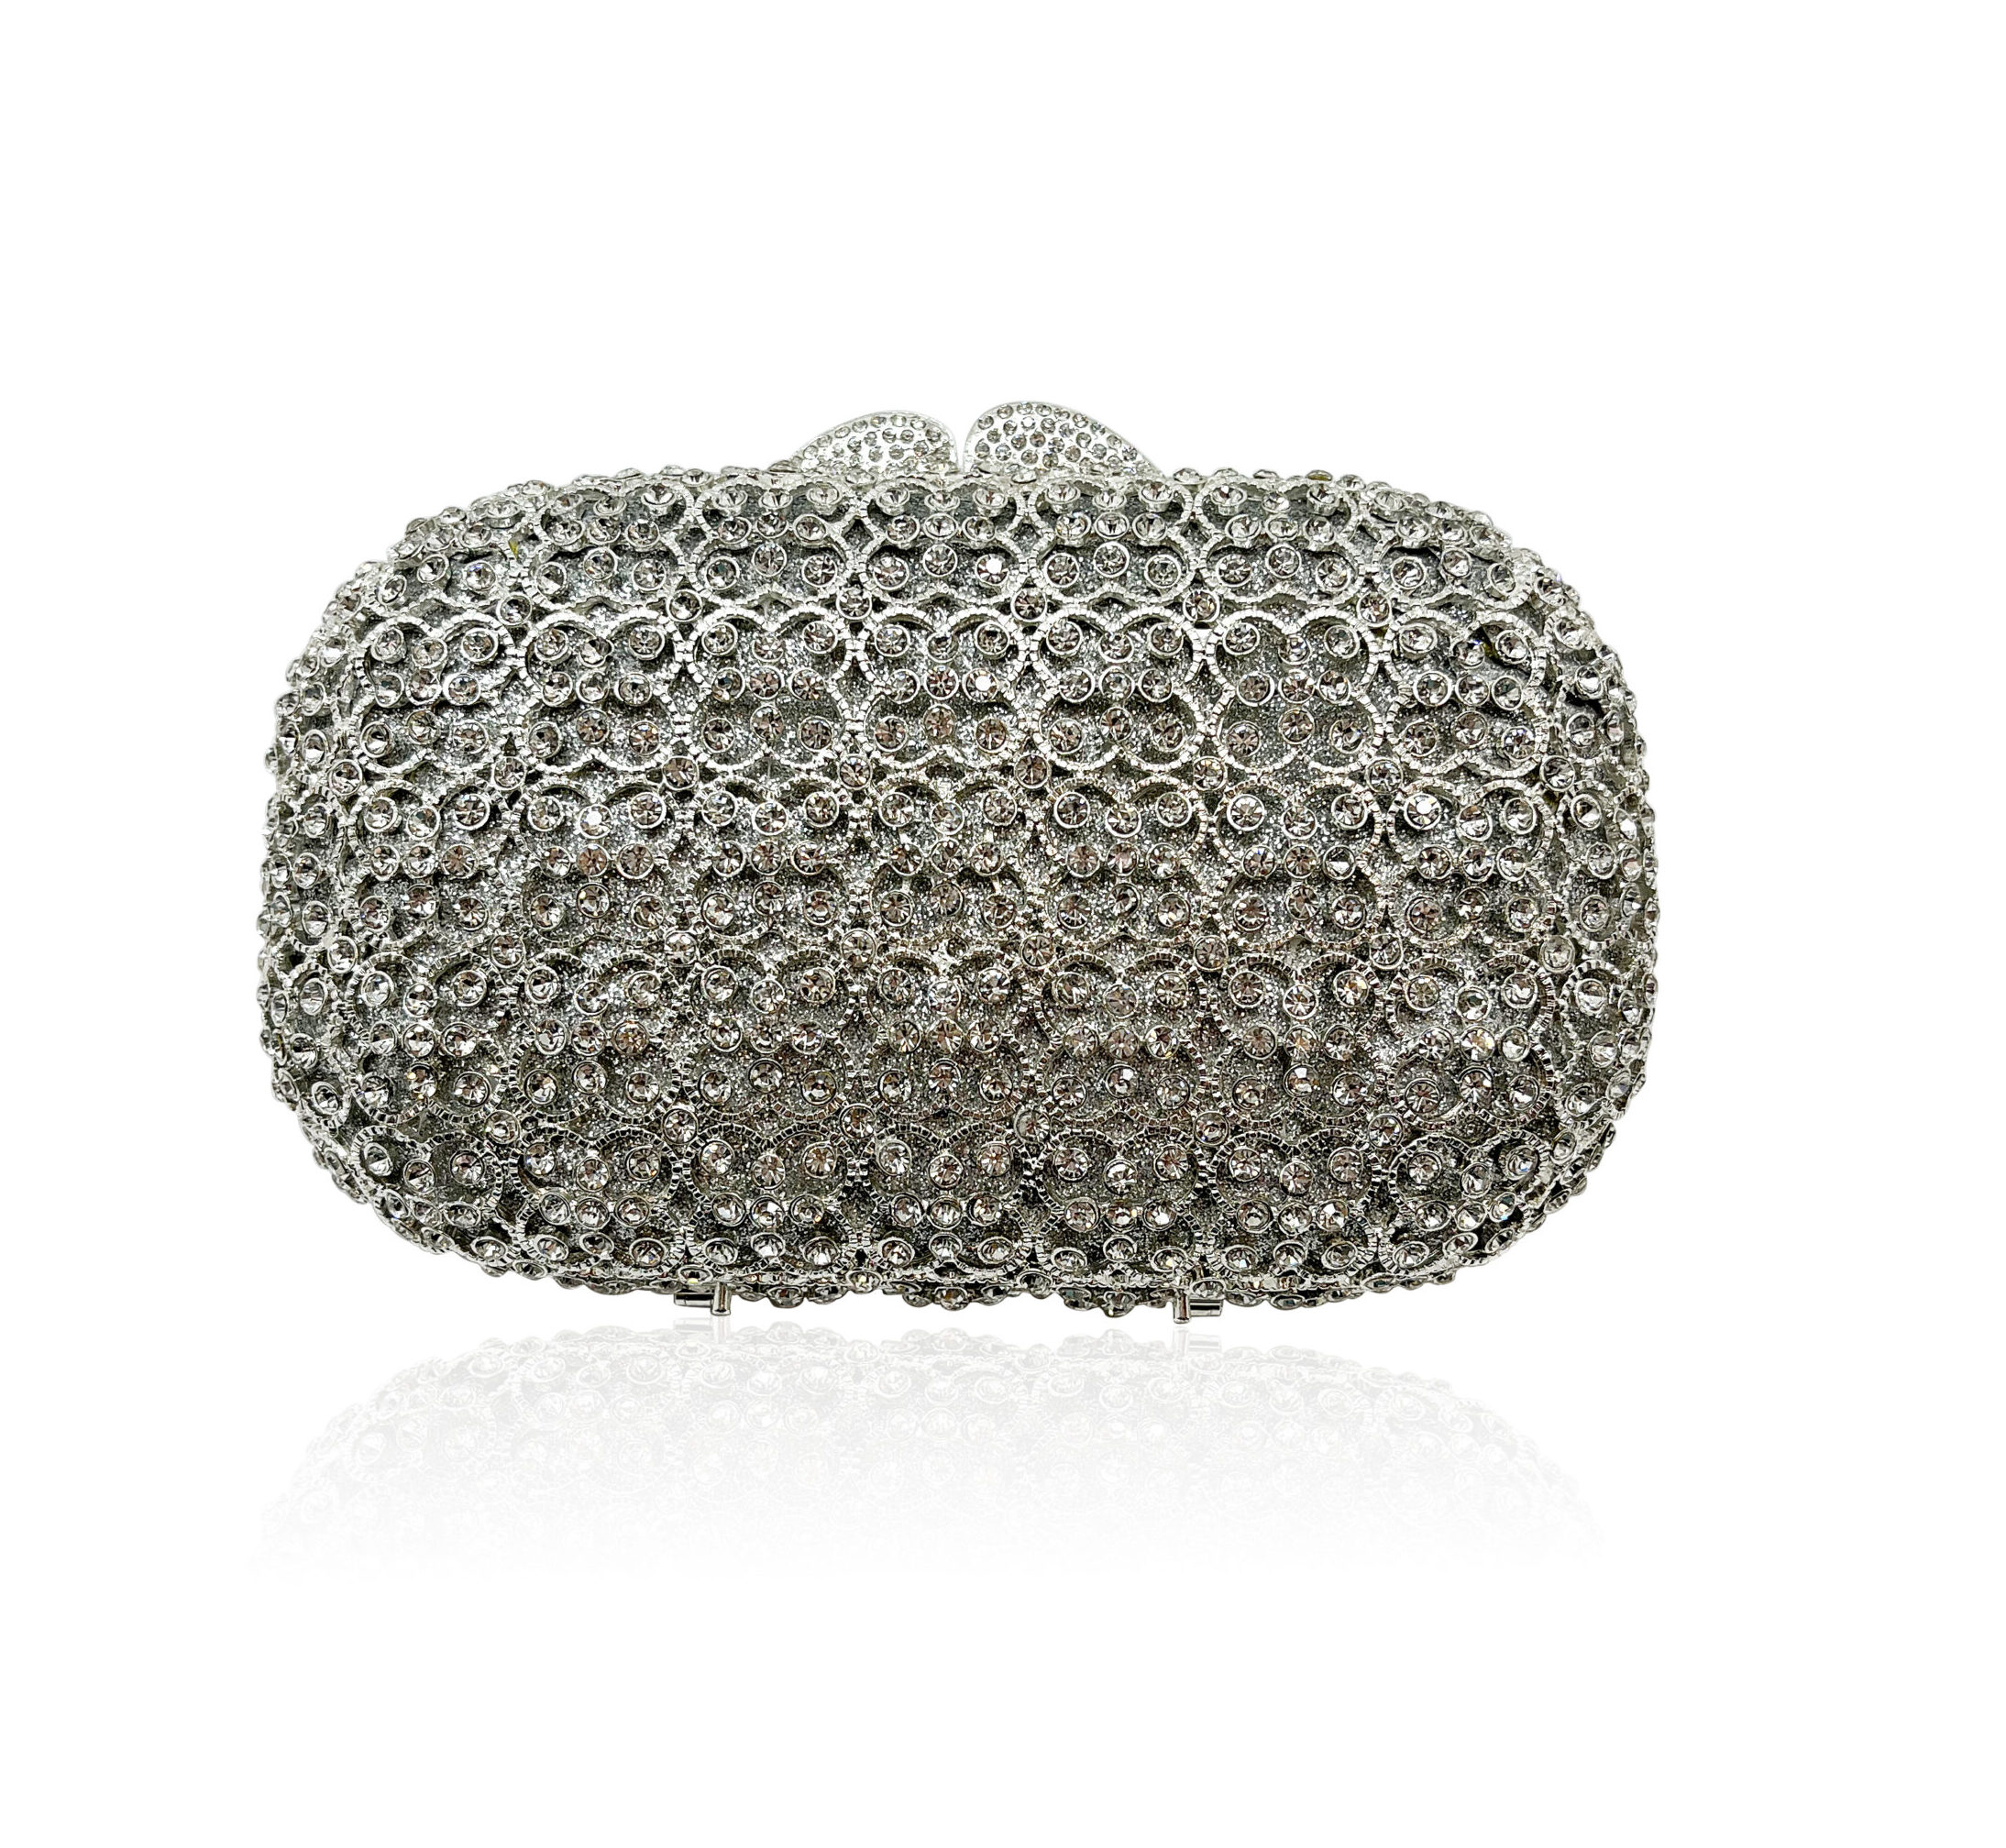 Silver Evening Purse|Emerie|Jeanette Maree|Shop Online Now